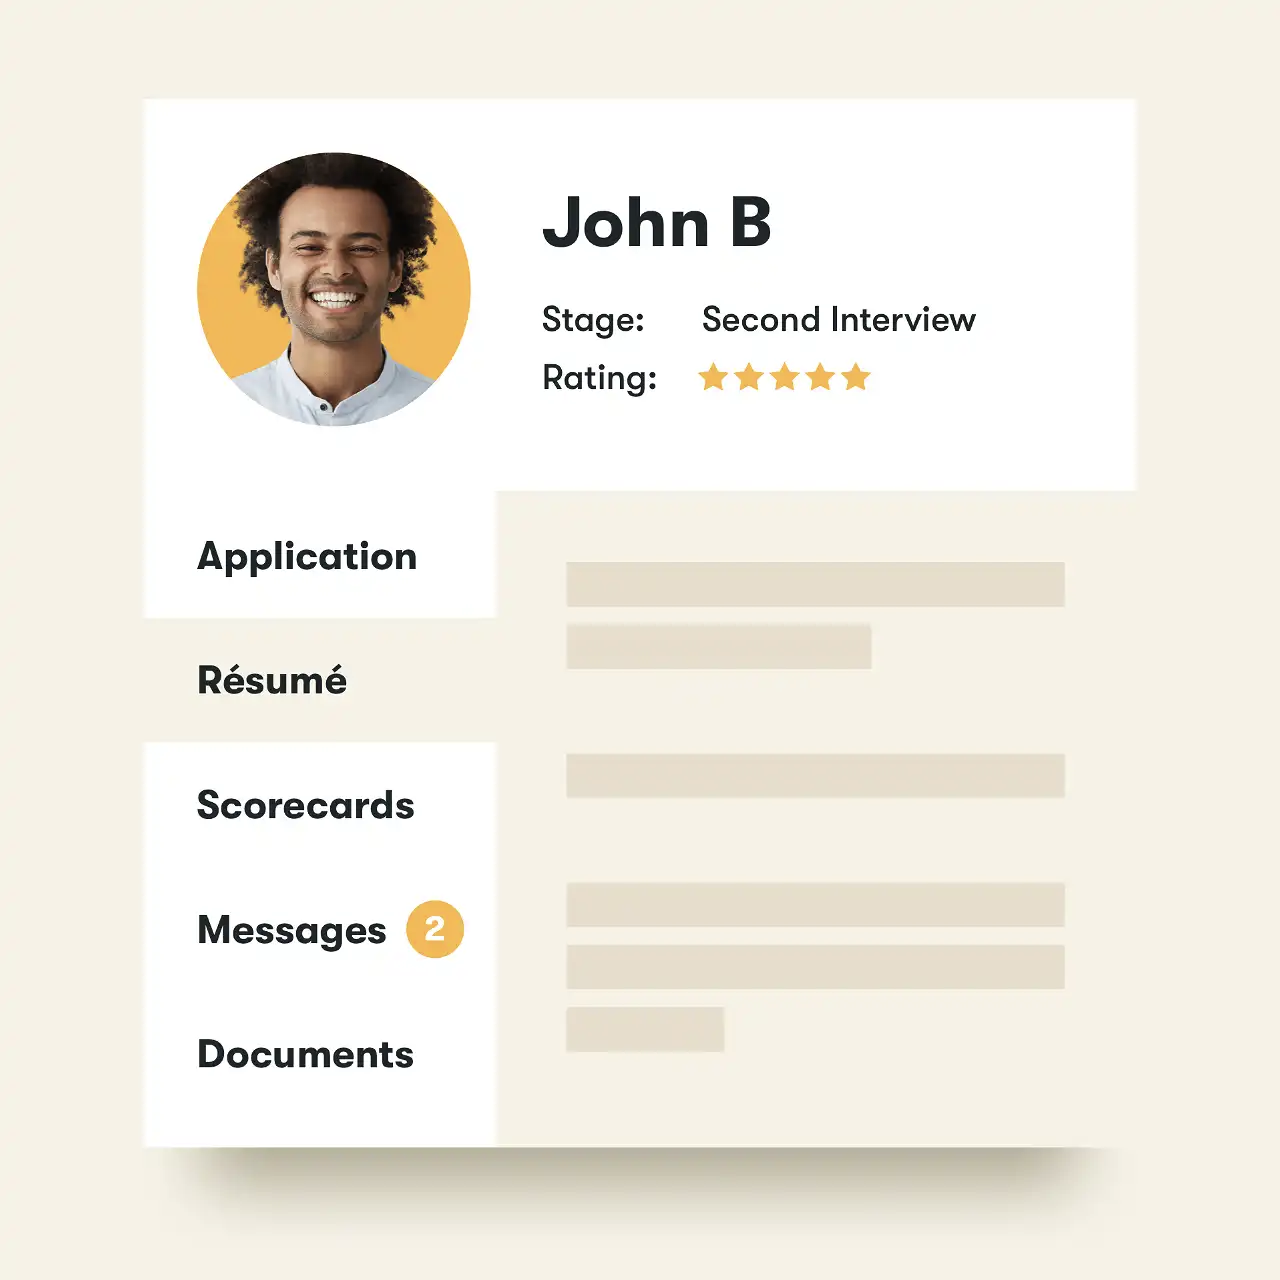 Pinpoint candidate profile showing a candidate's picture and areas to add the candidate's résumé, application, scorecard, internal messages, and other documents.